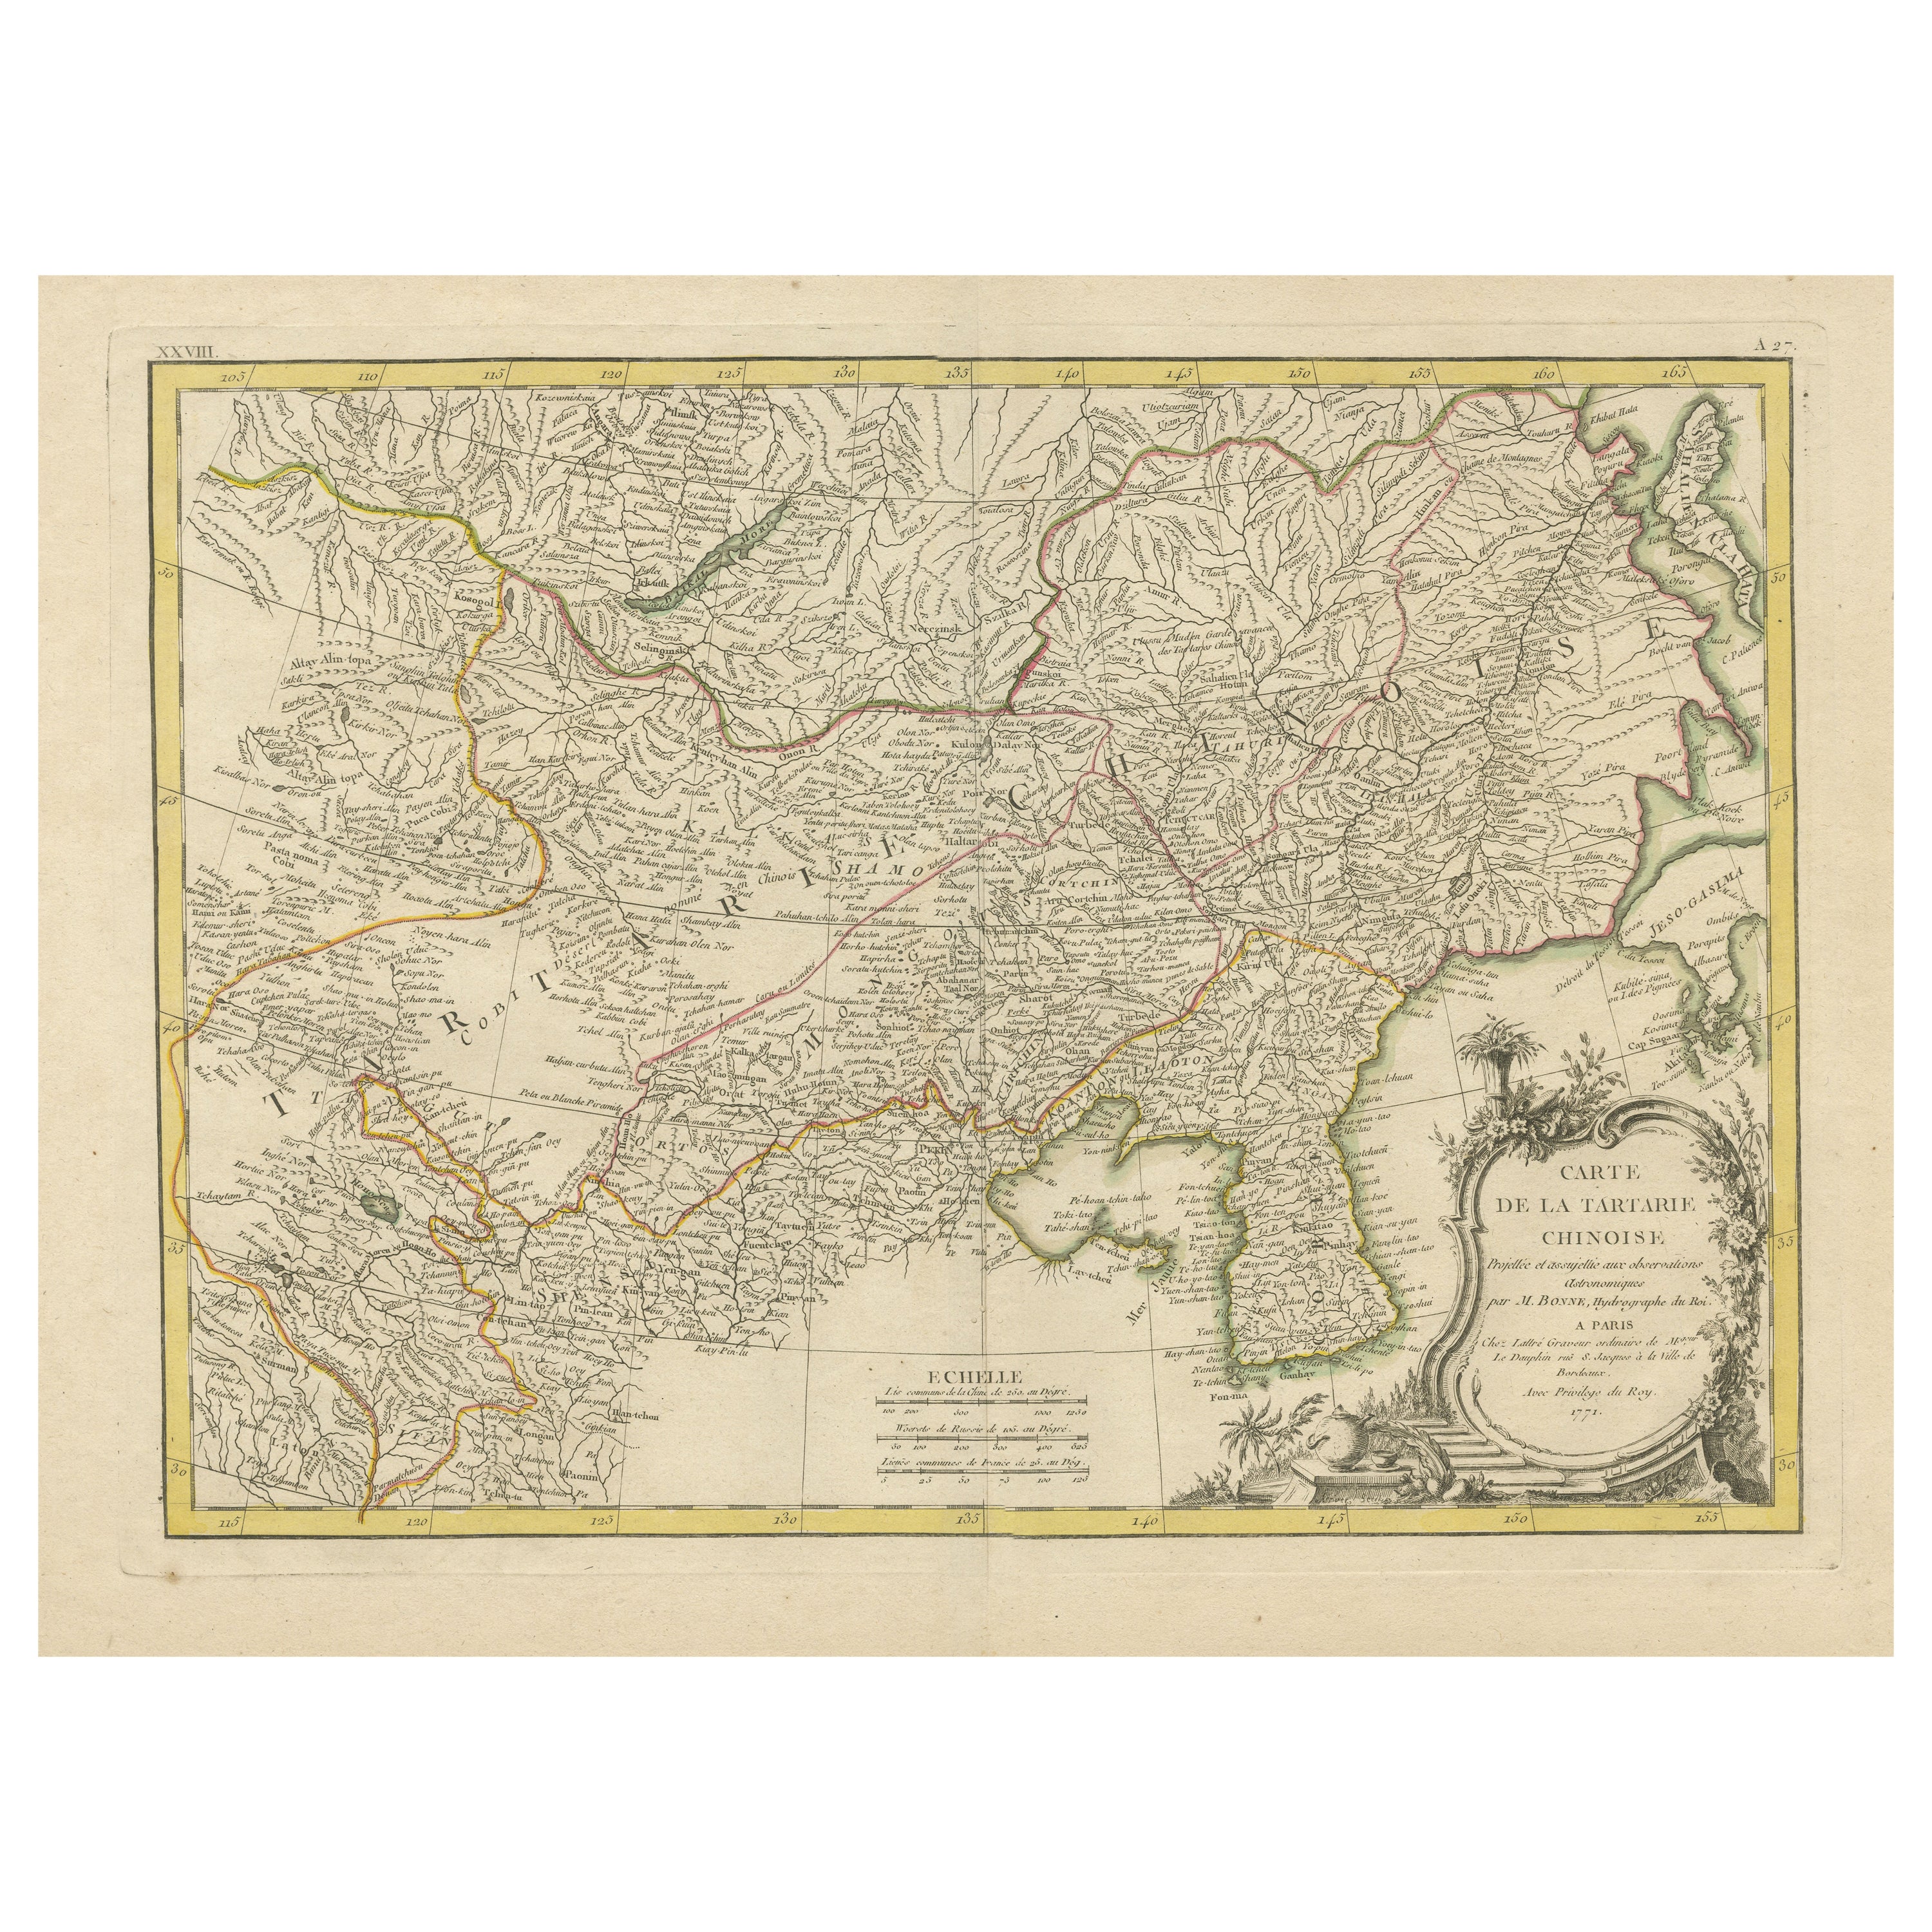 Original Old Map of Present-Day Mongolia, Northeast China and Korea For Sale